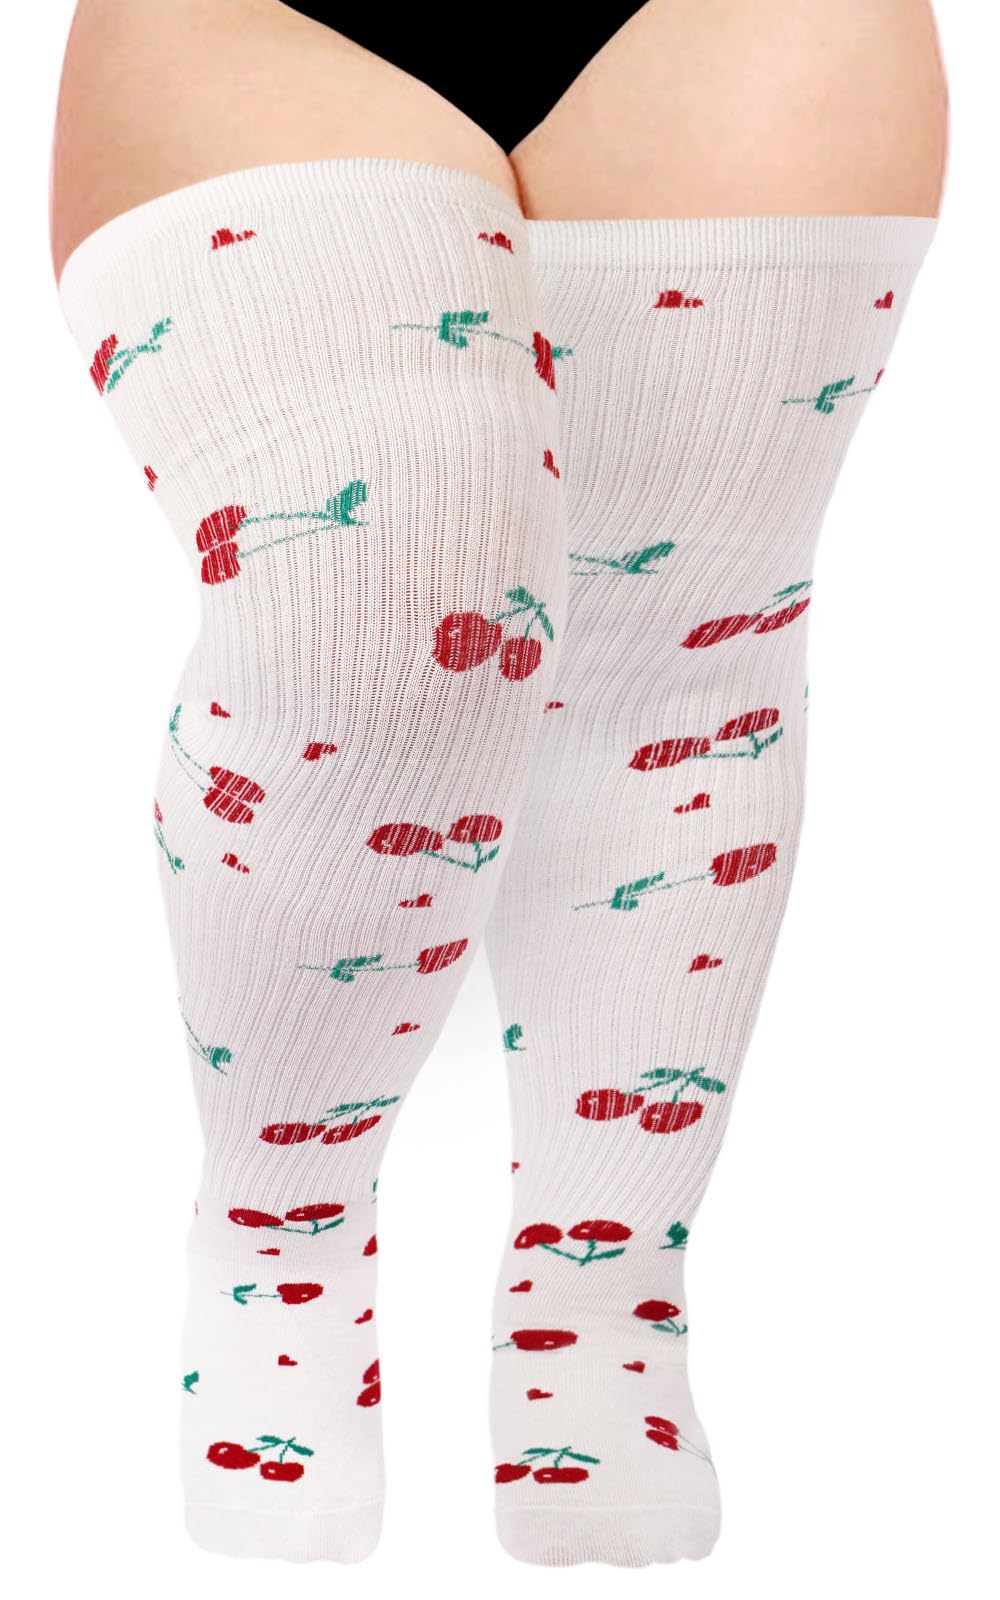 Womens Knit Cotton Extra Long Over the Knee High Socks-White & Red